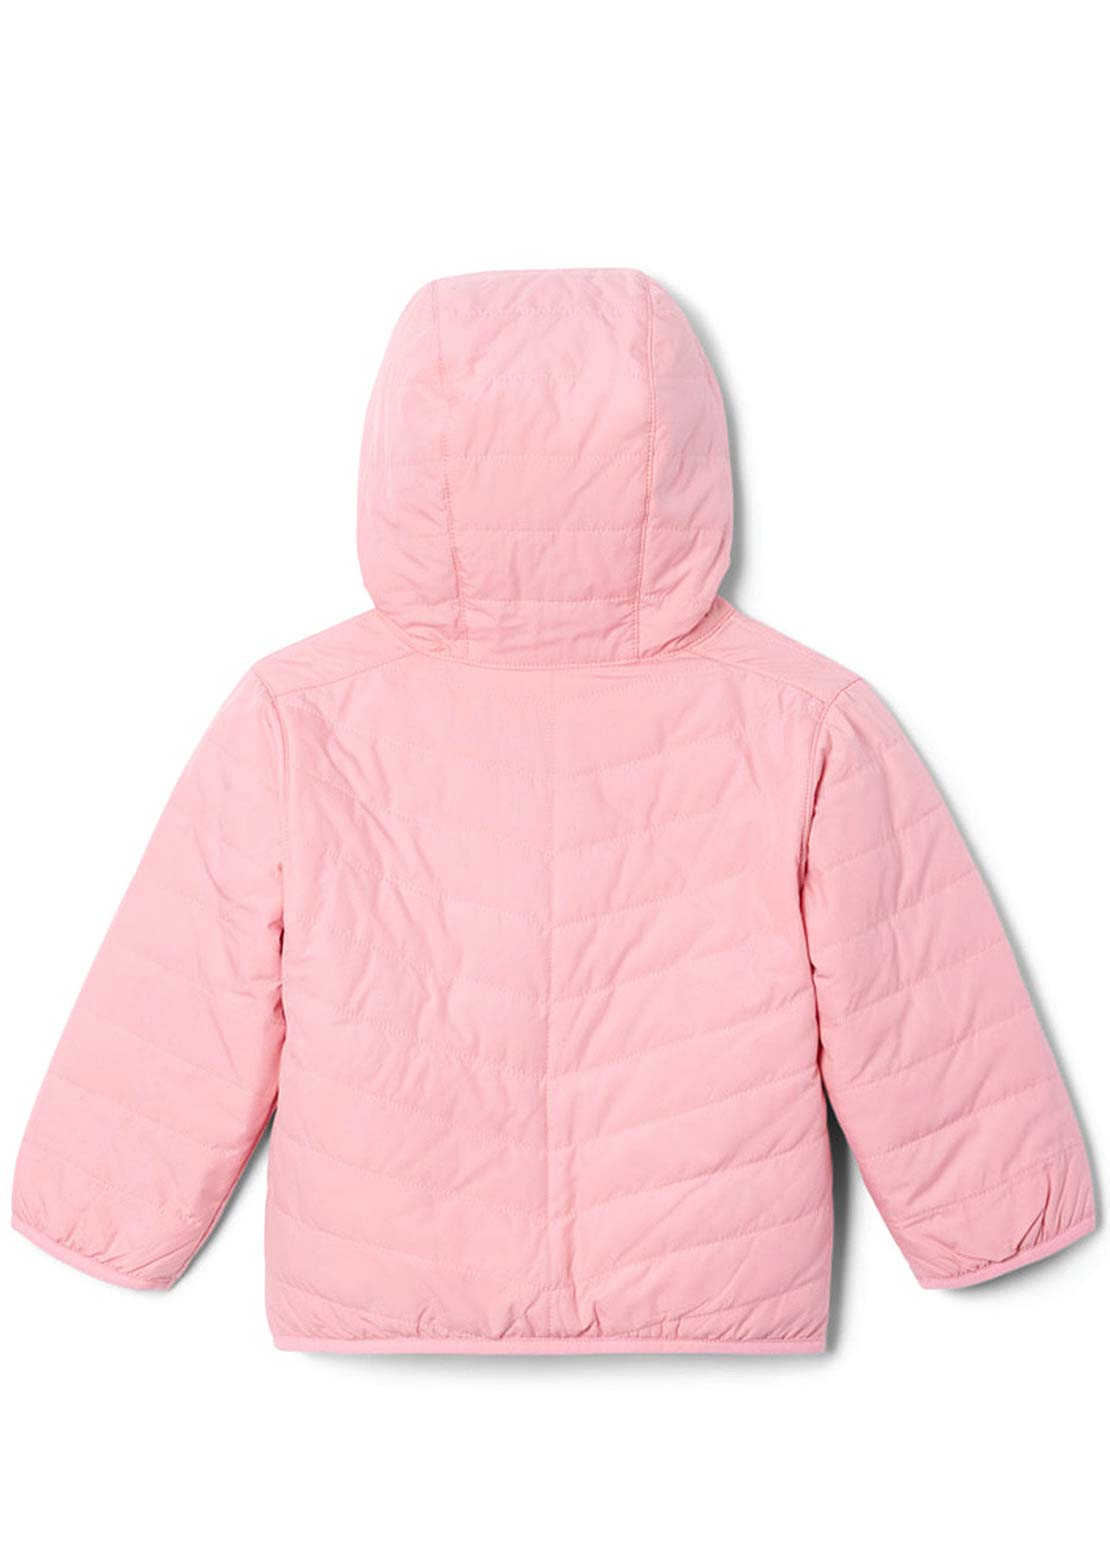 Columbia Junior Double Trouble Jacket Pink Orchid/Stone Green Checkered Peak